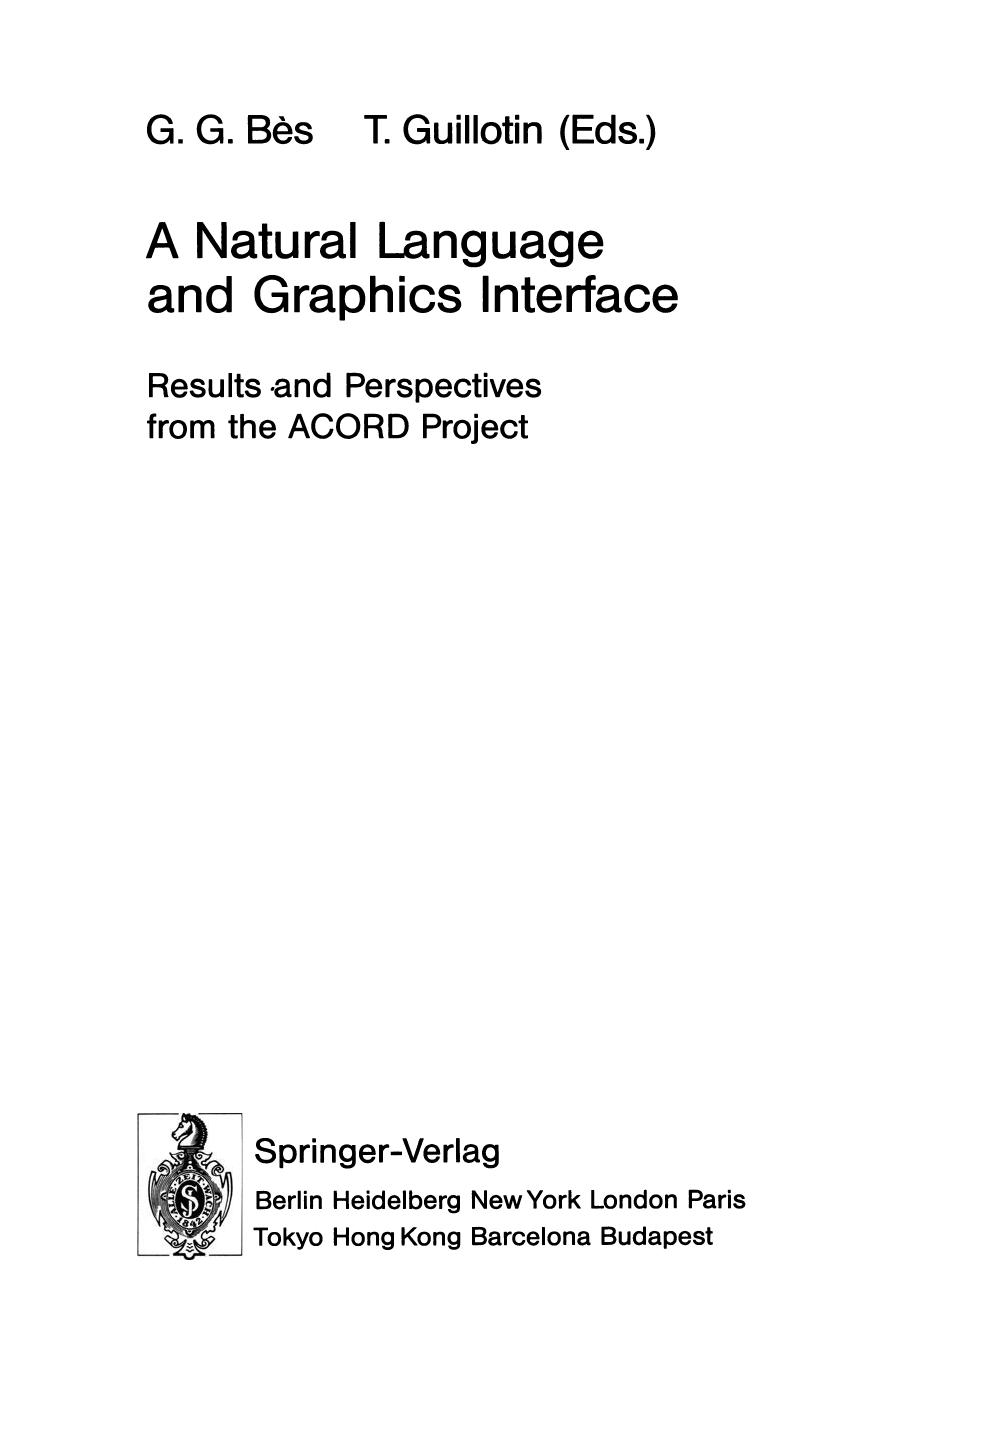 A Natural Language and Graphics Interface Results and Perspectives from the ACORD Project (Thierry Guillotin, Gabriel G. Bès (auth.) etc.)9783540556756